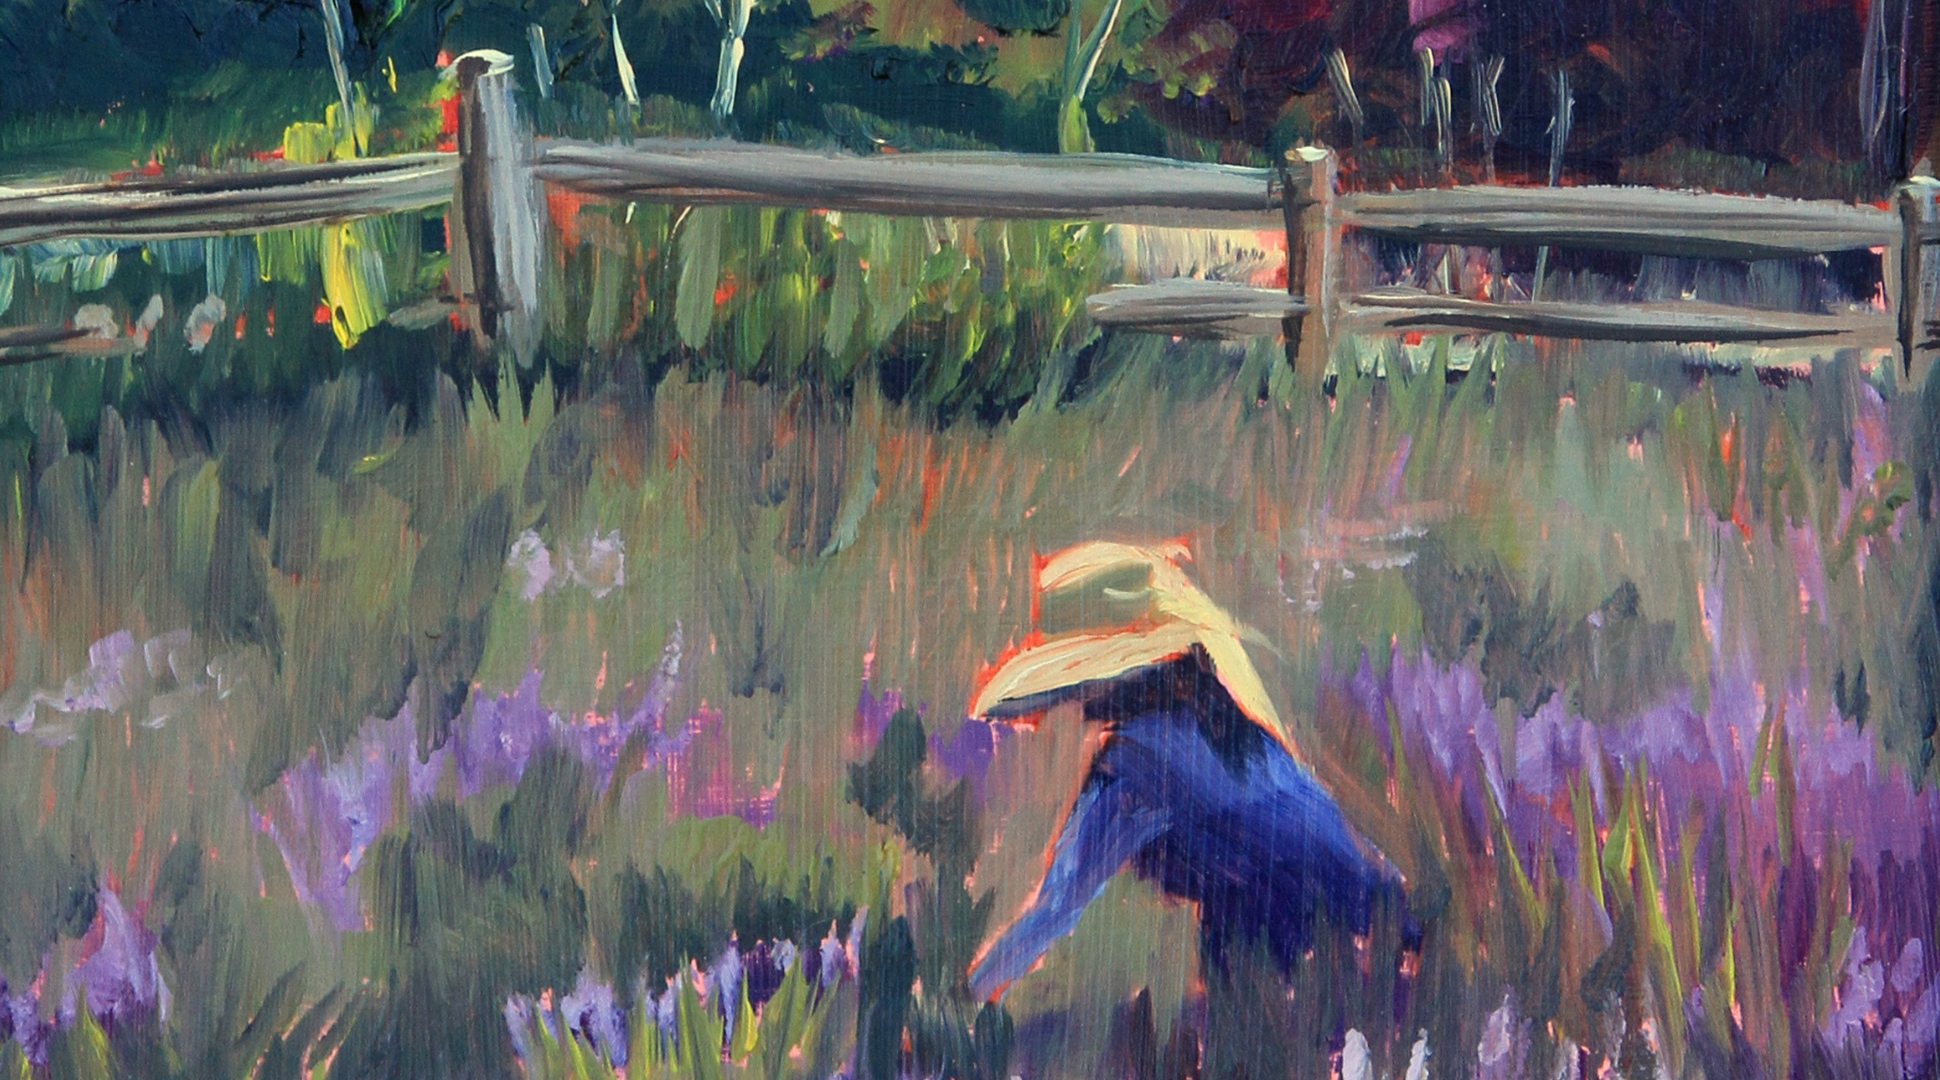 2021 Virtual Art Show - Mayors Selection Winner: "Lavender Blue" by Dawn Stanojev 